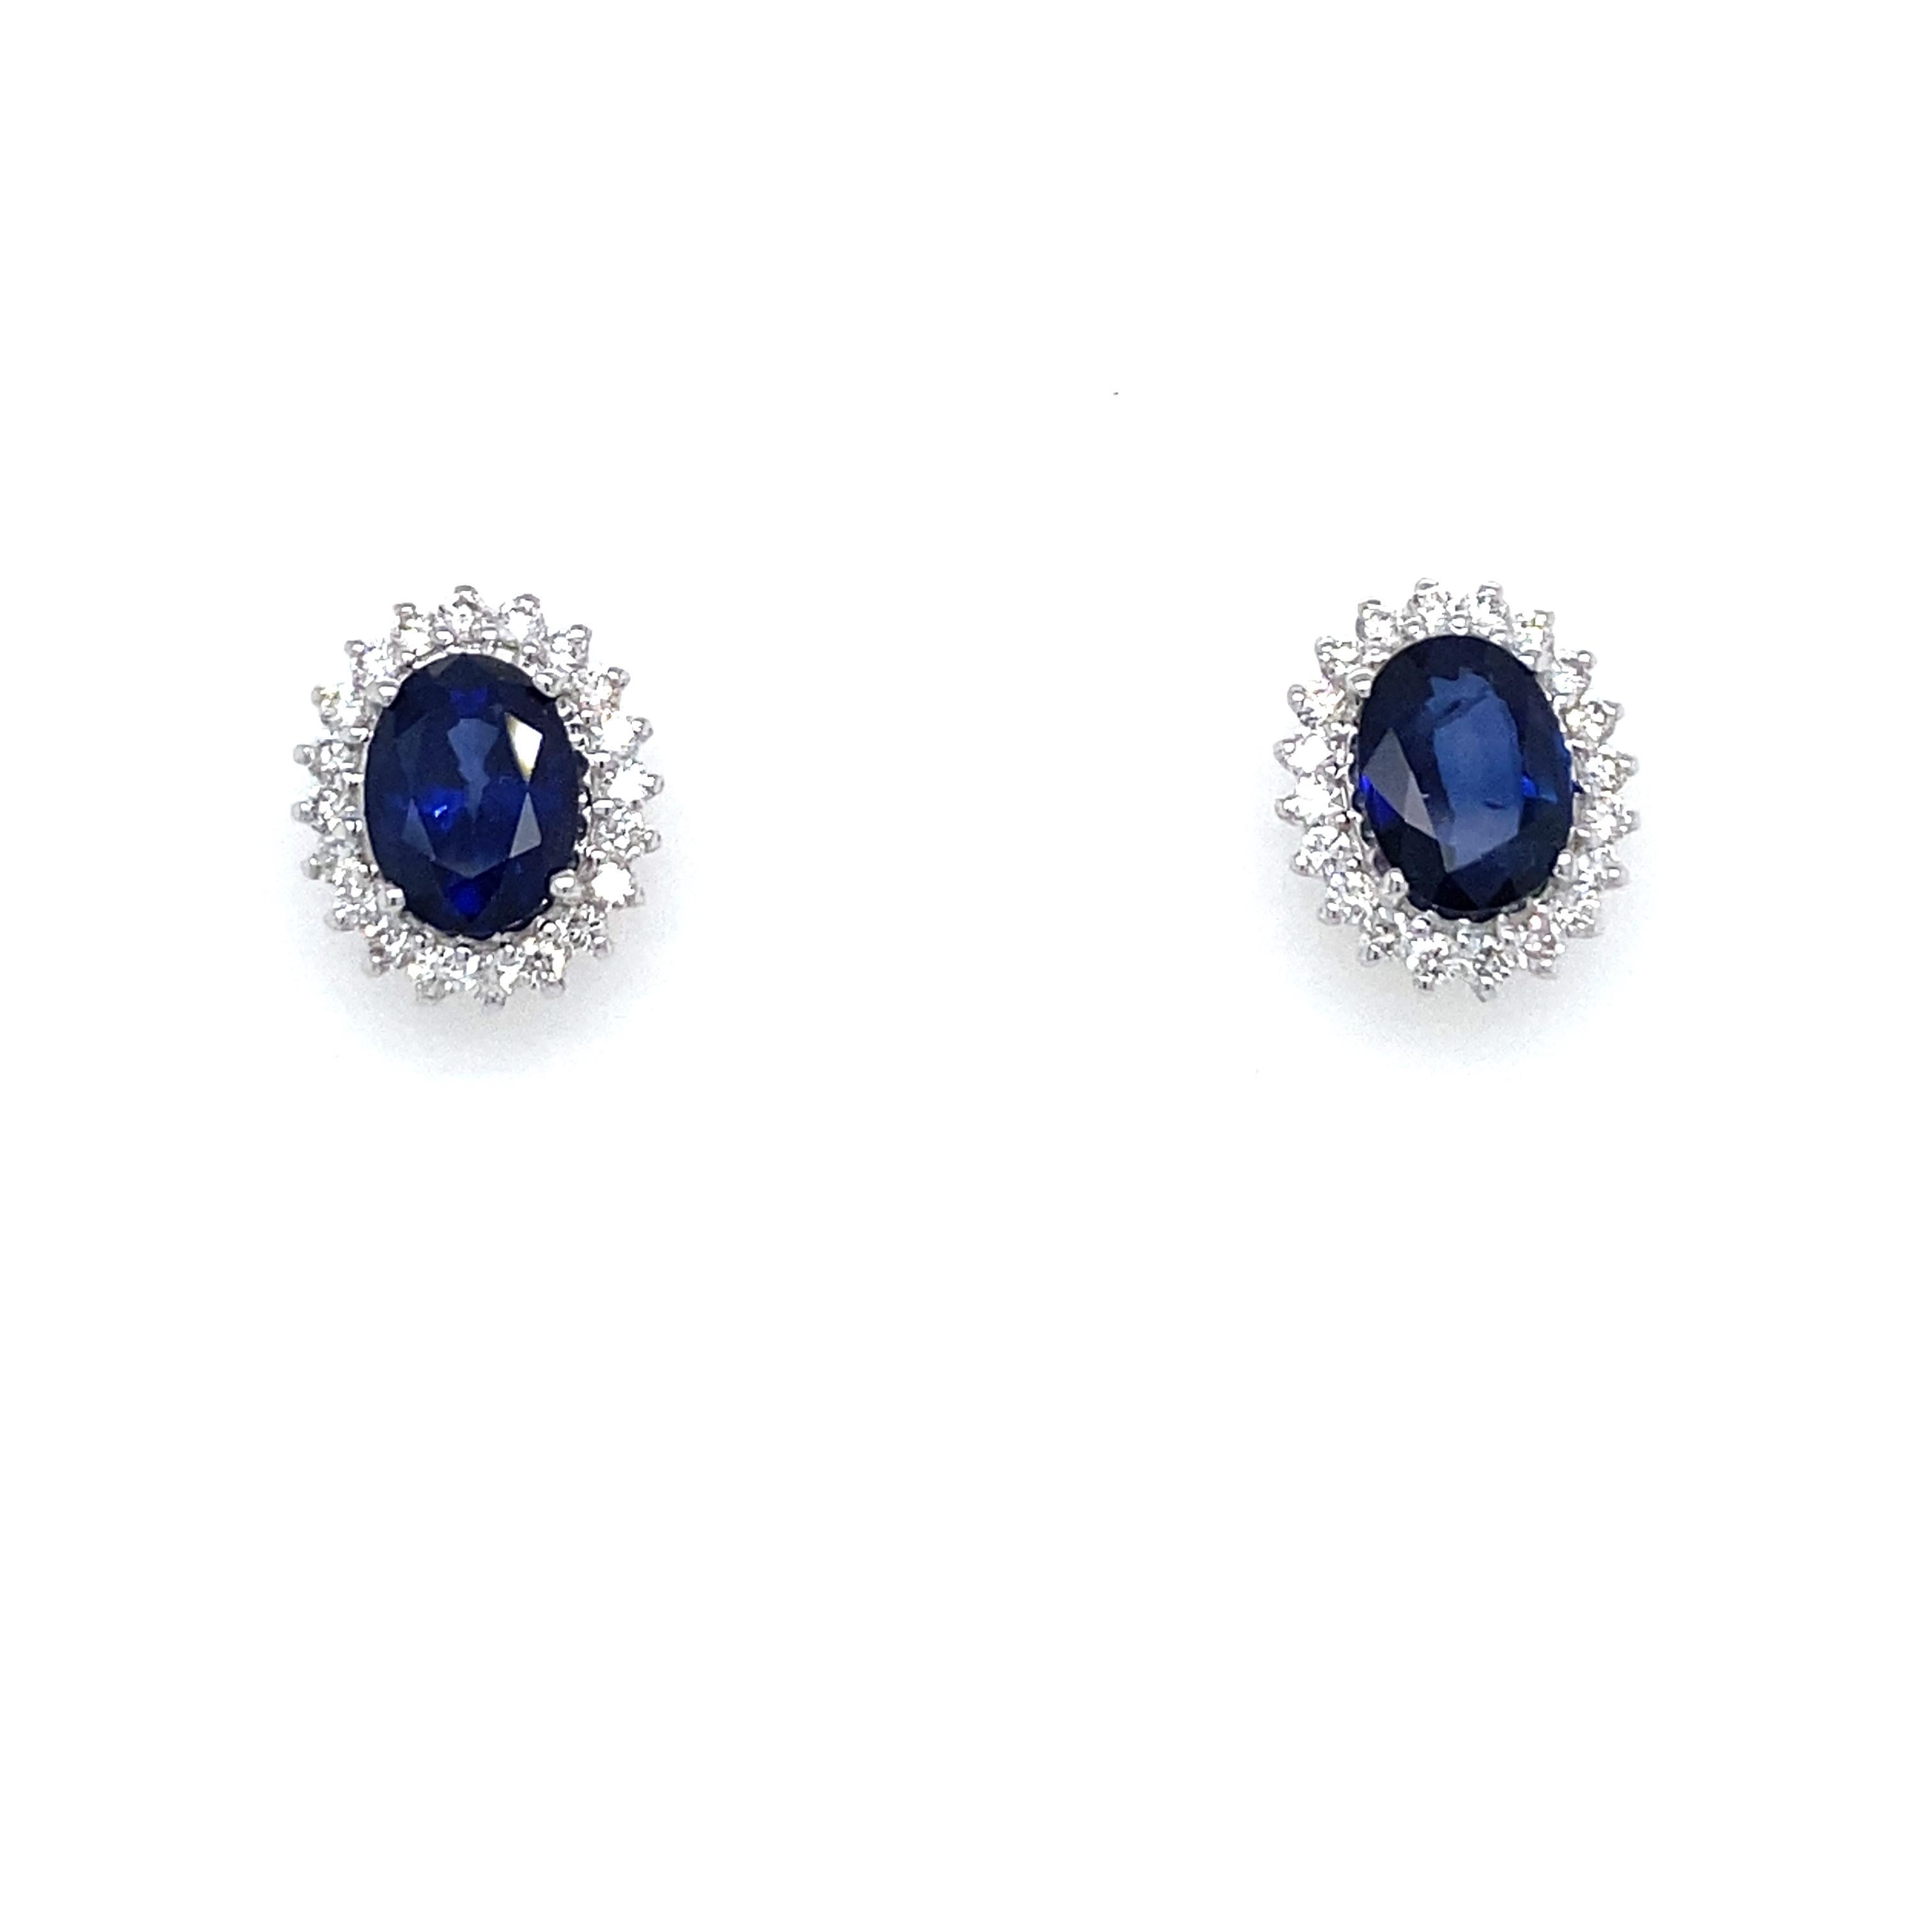 Gorgeous pair of vintage Sapphire diamond cluster earrings handcrafted in solid 18k white Gold. 

They are set with Bright Natural Sapphire in the center, total weight 2.41 carat, and surrounded by an halo of colorless sparkling Round Brilliant cut